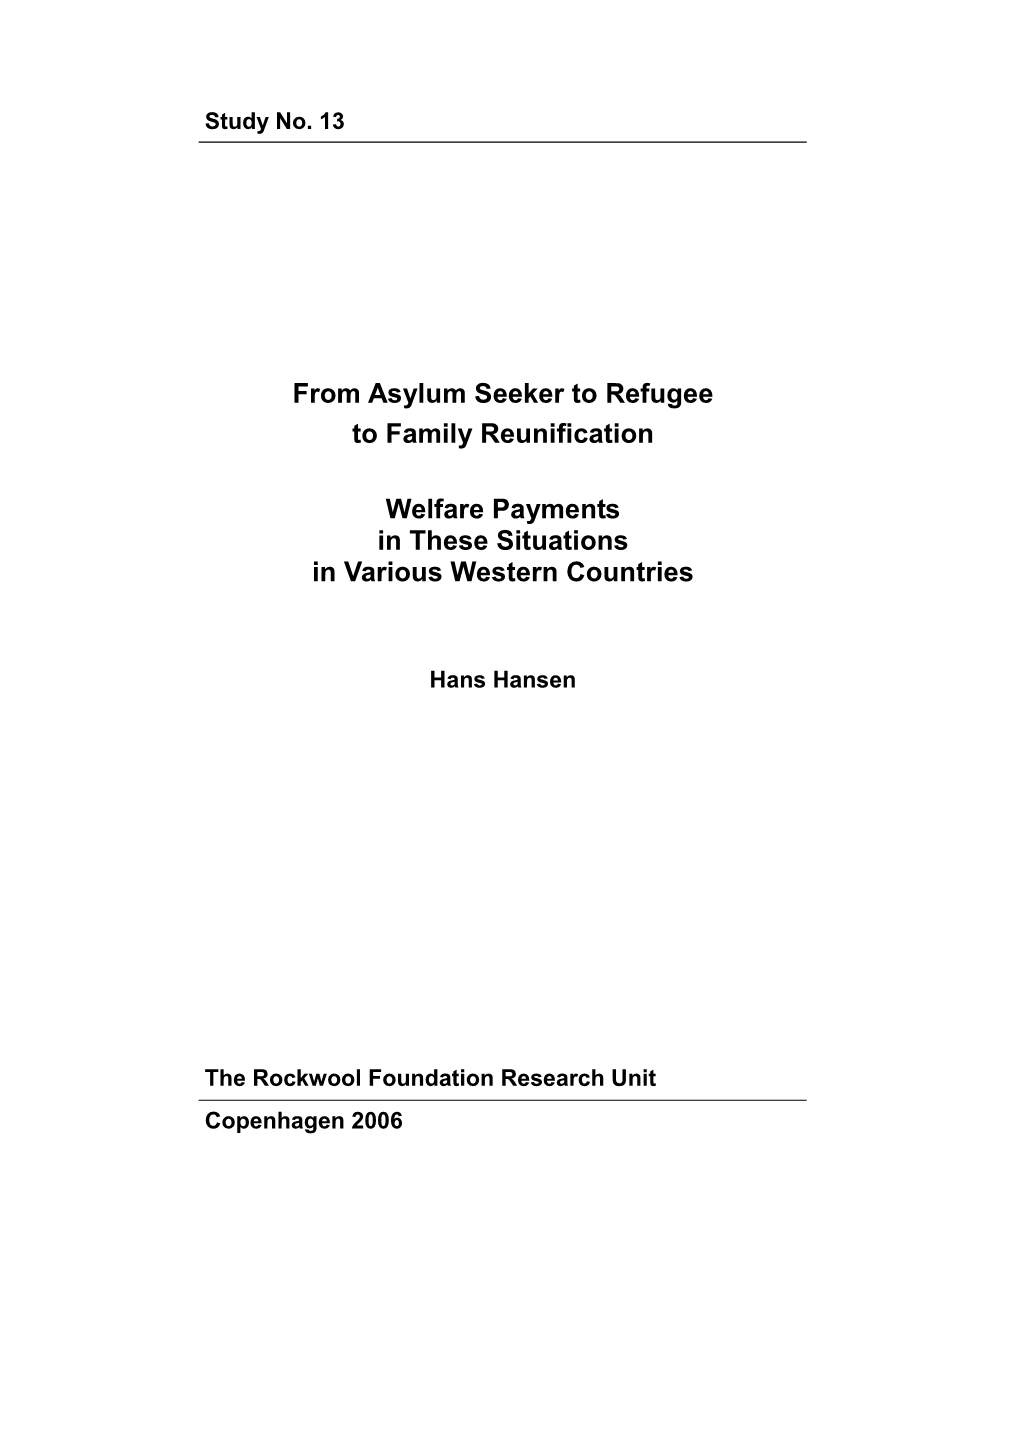 From Asylum Seeker to Refugee to Family Reunification Welfare Payments in These Situations in Various Western Countries Study No